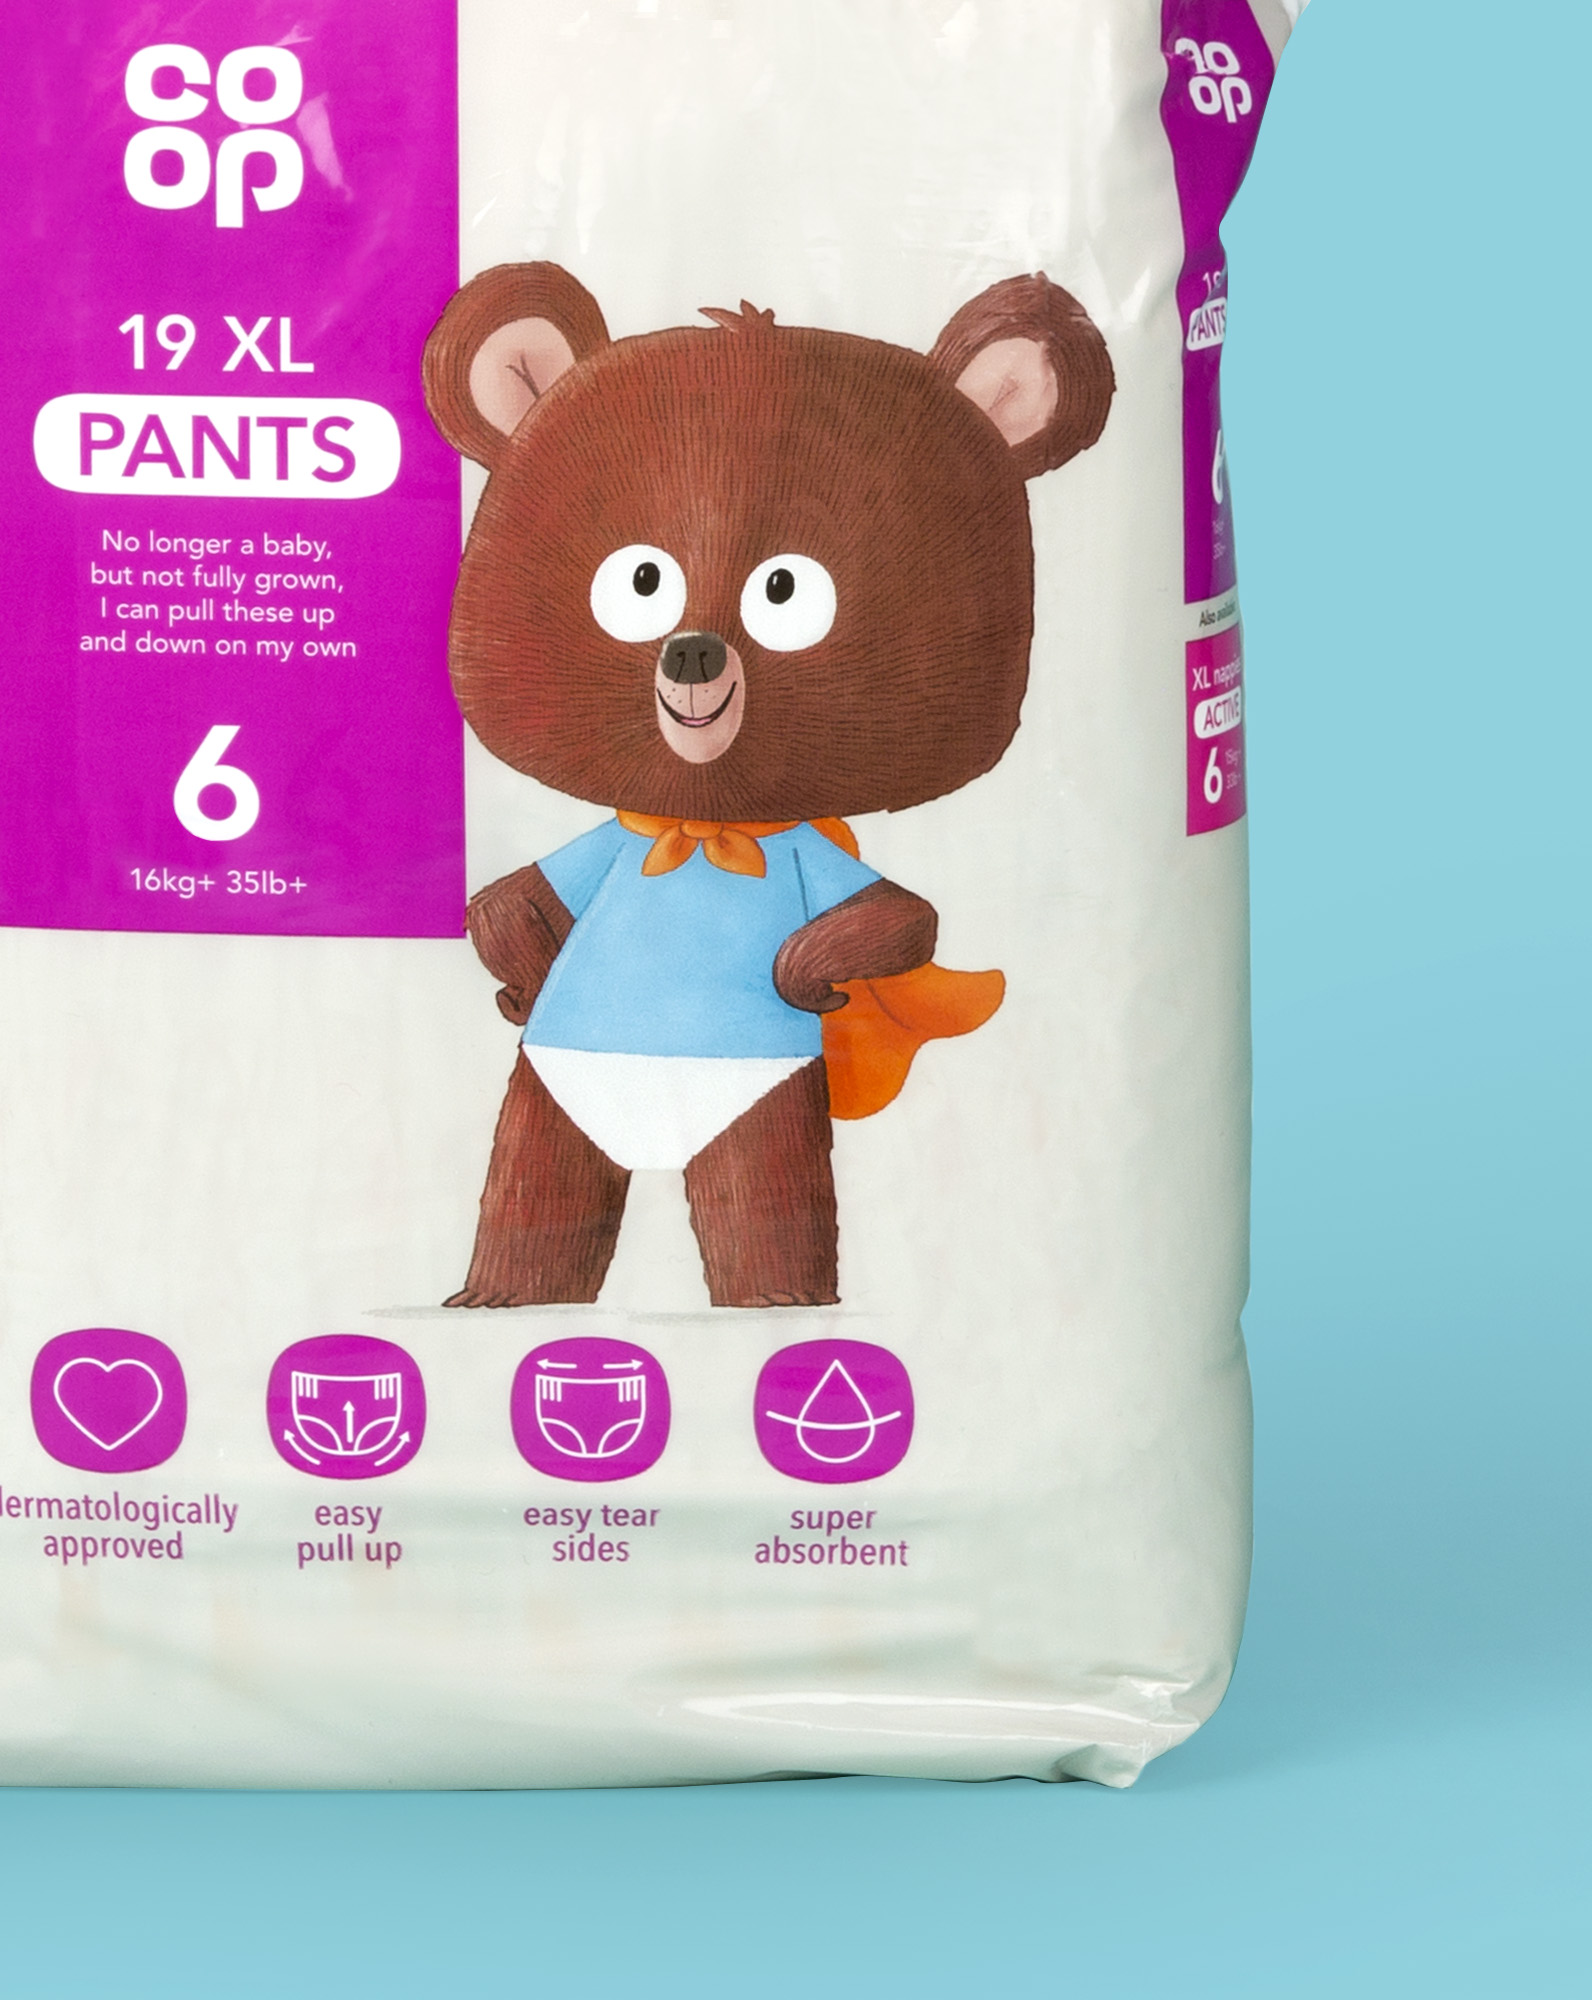 New Packaging Baby Care Range for Millennial Parenting and Values